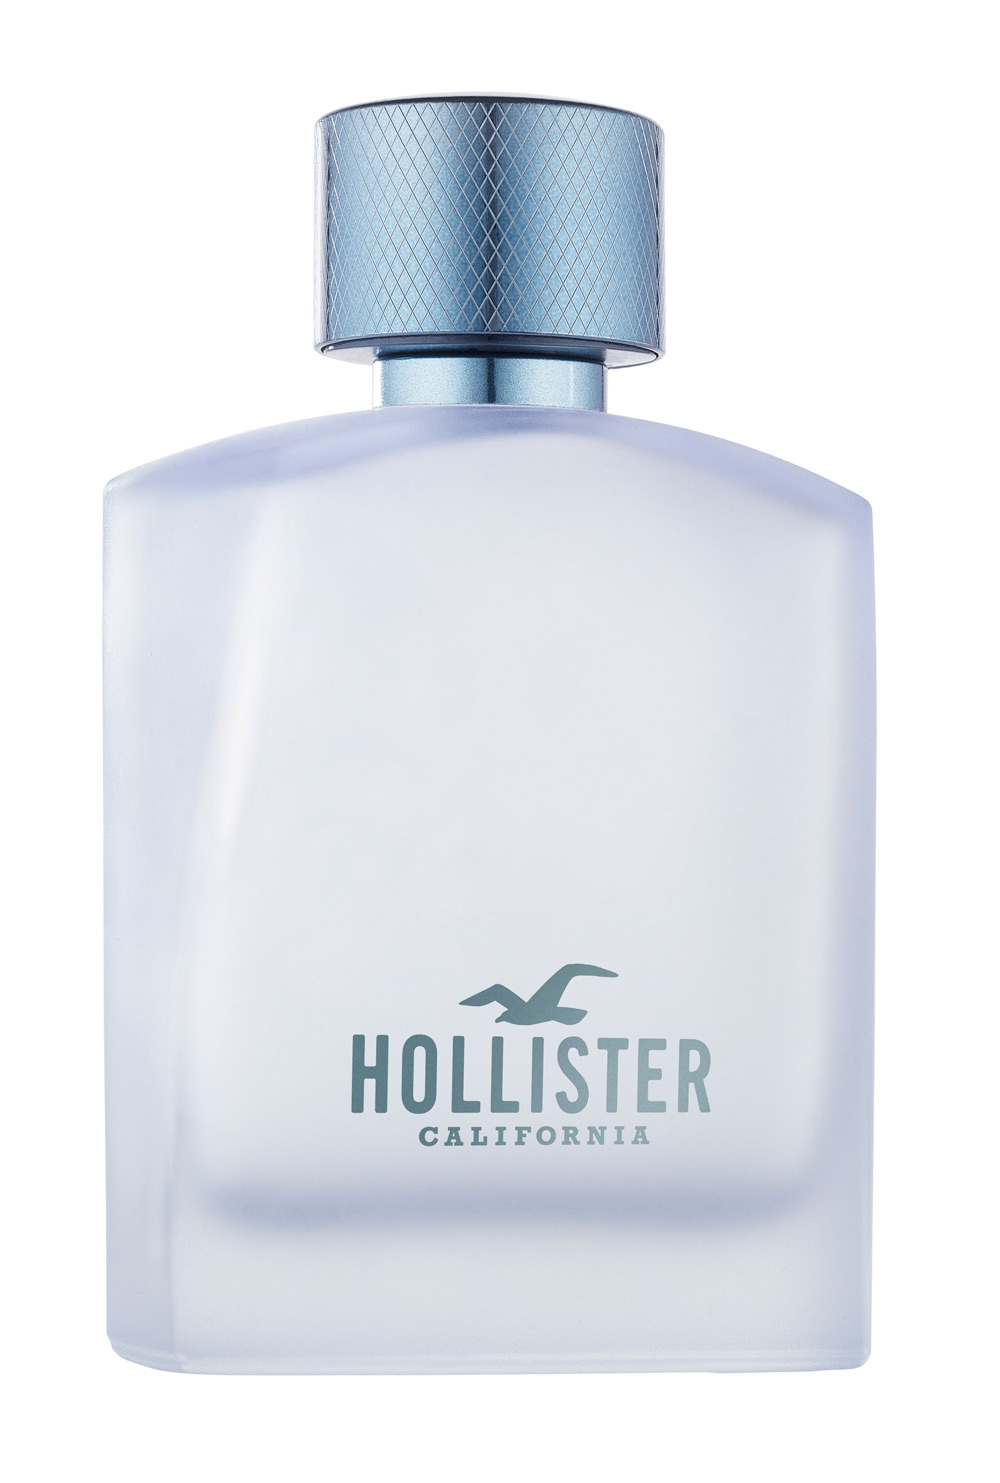 hollister california wave for him